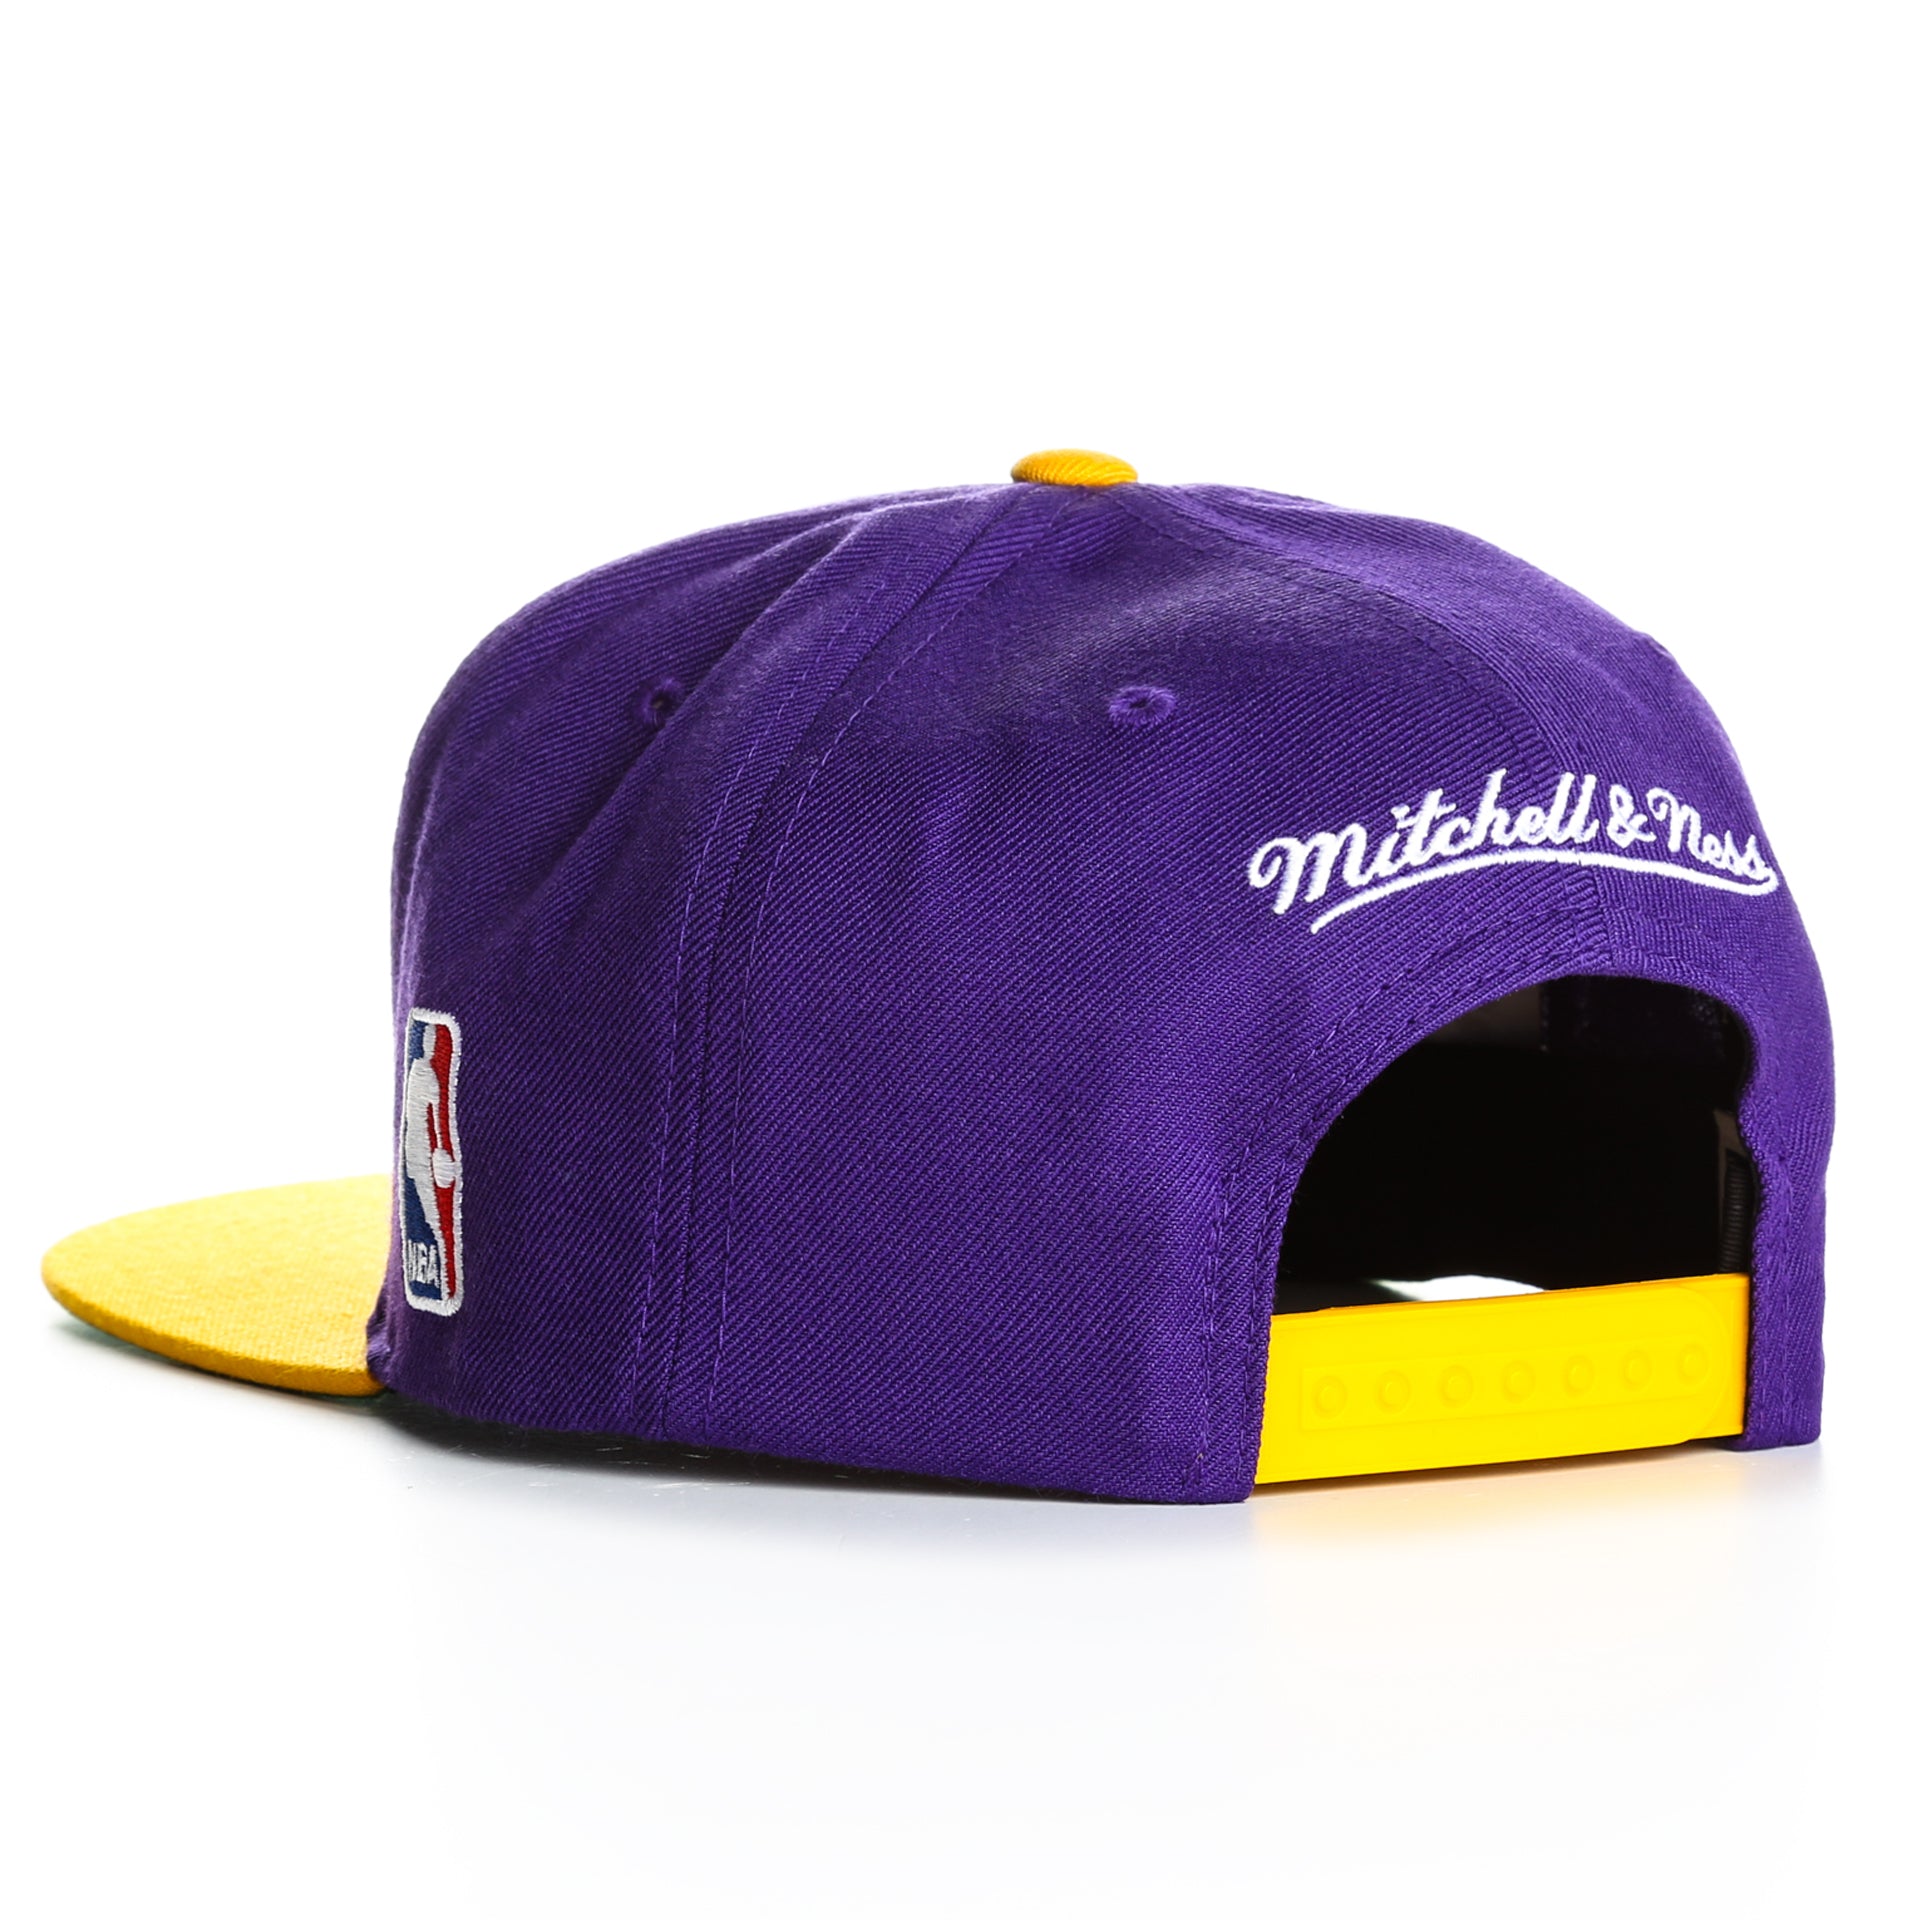 purple and gold lakers hat